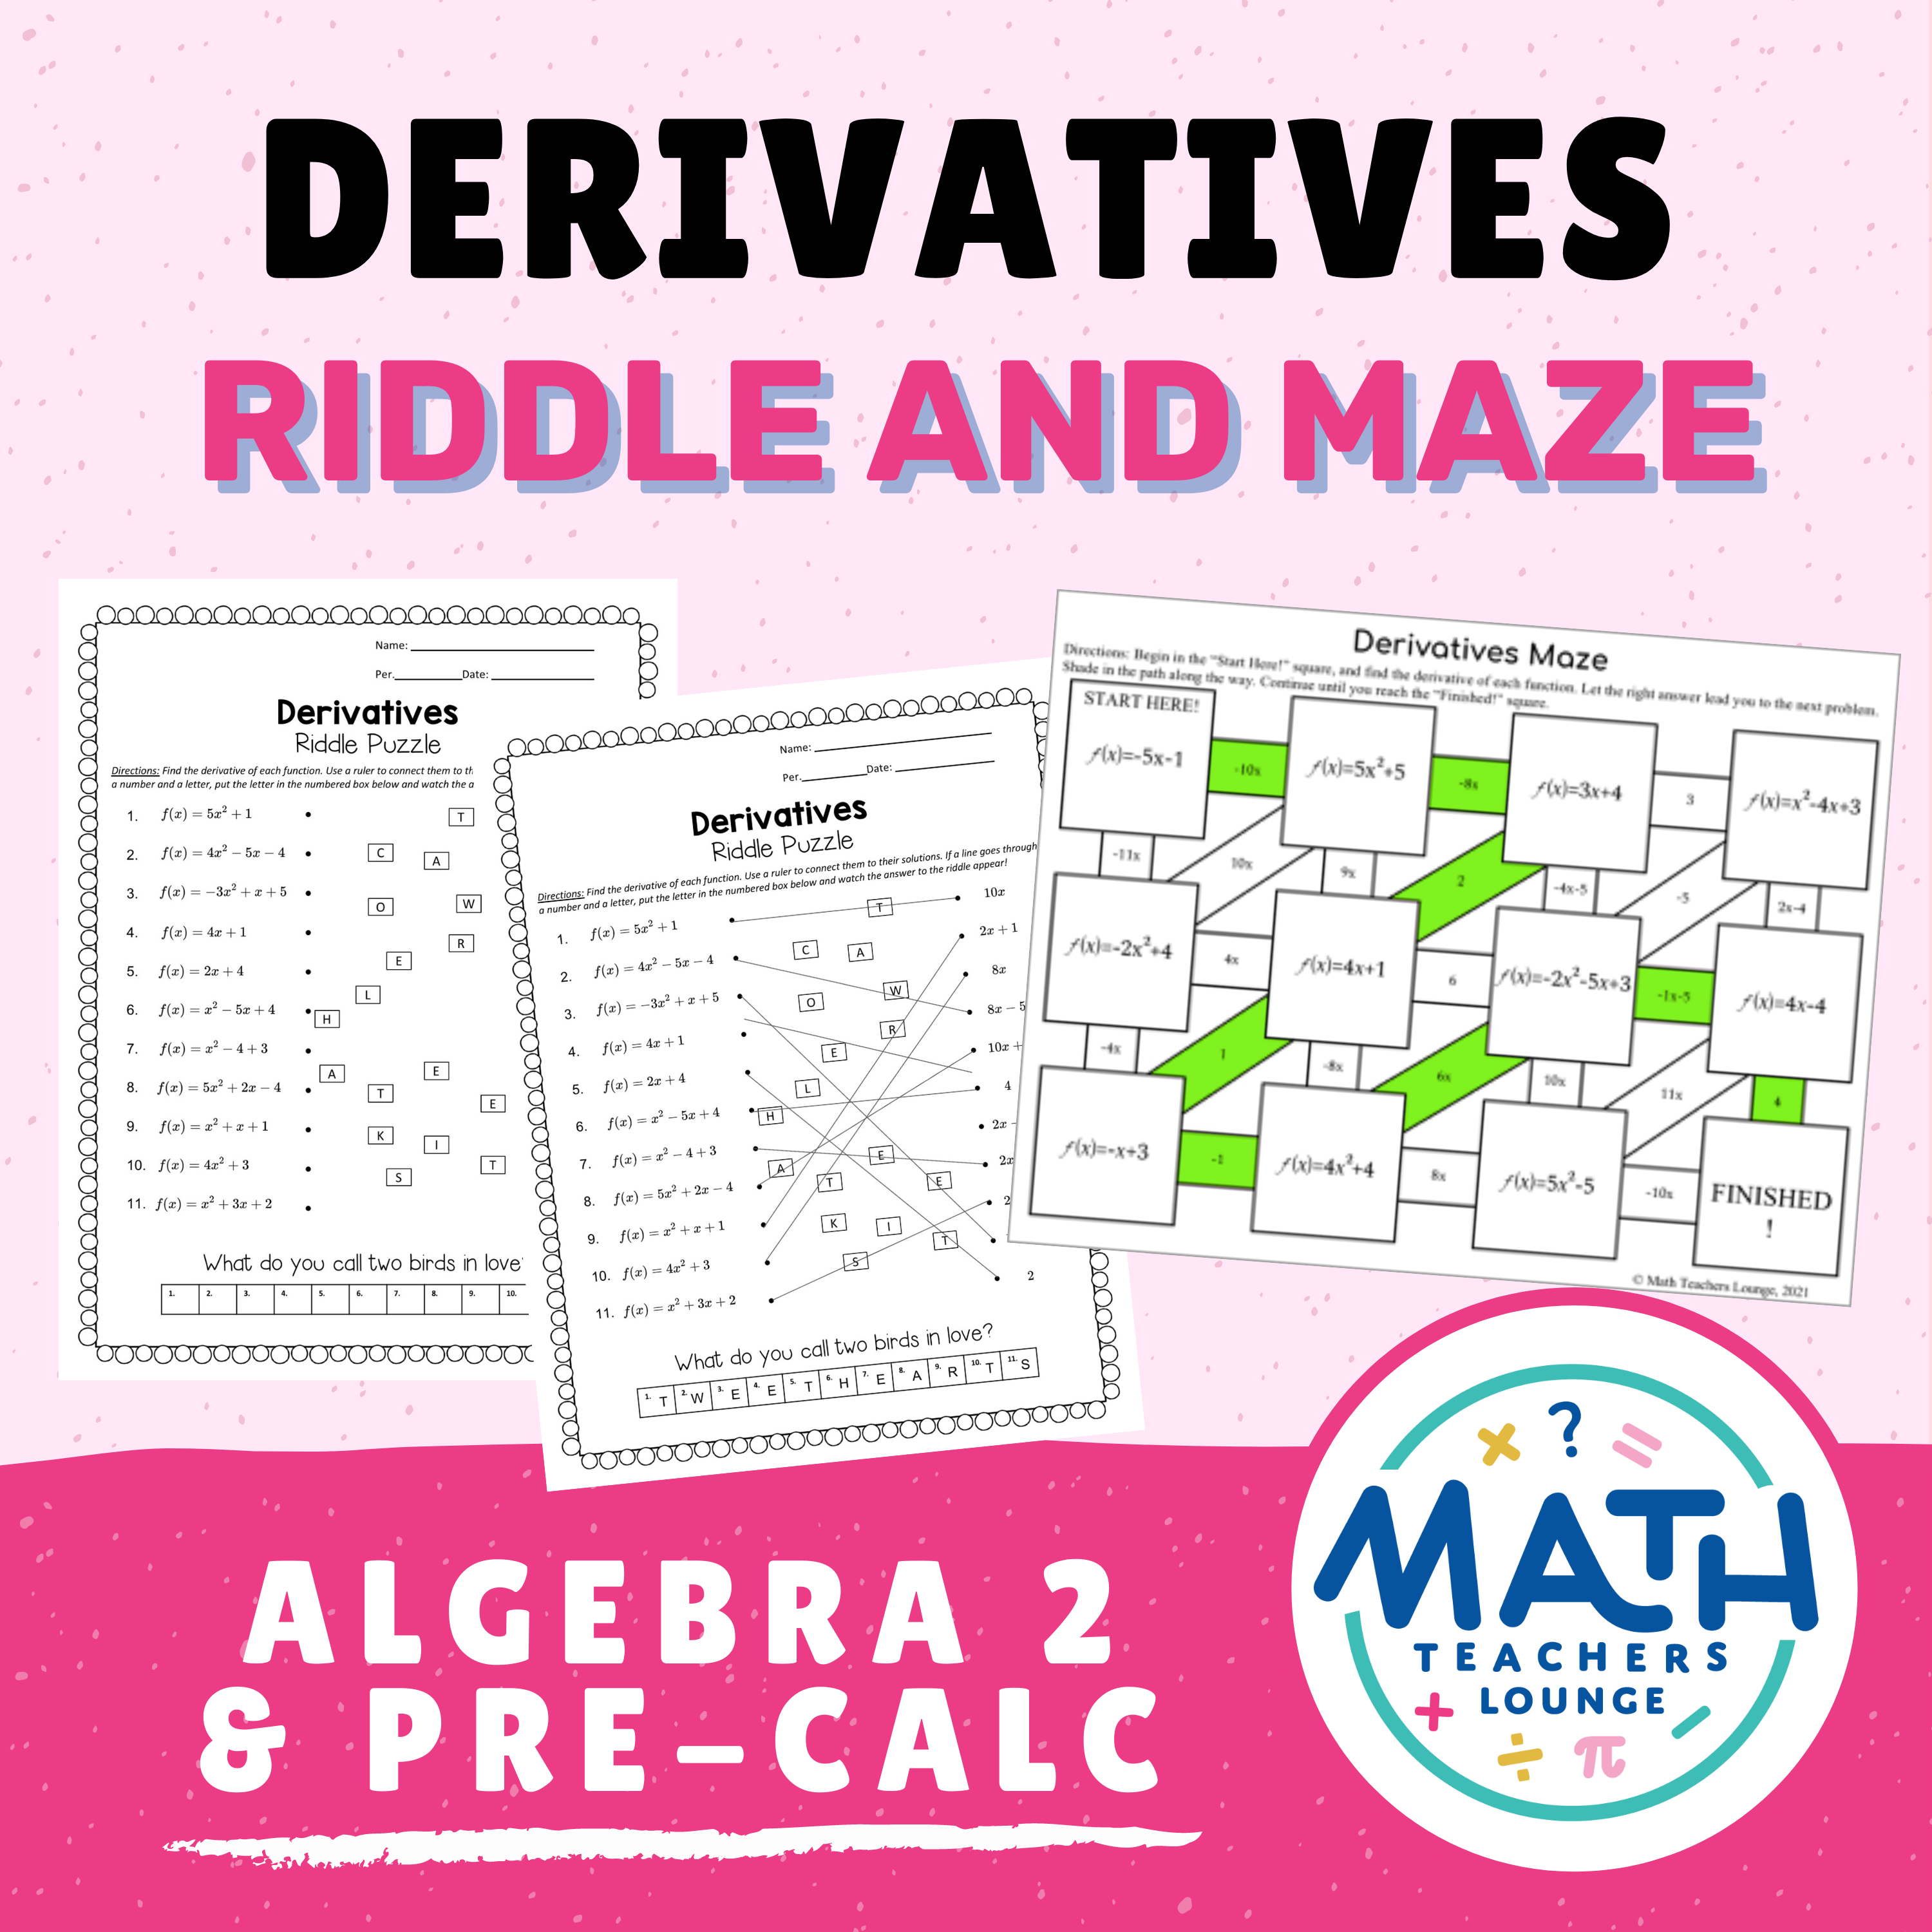 Derivatives - Riddle and Maze